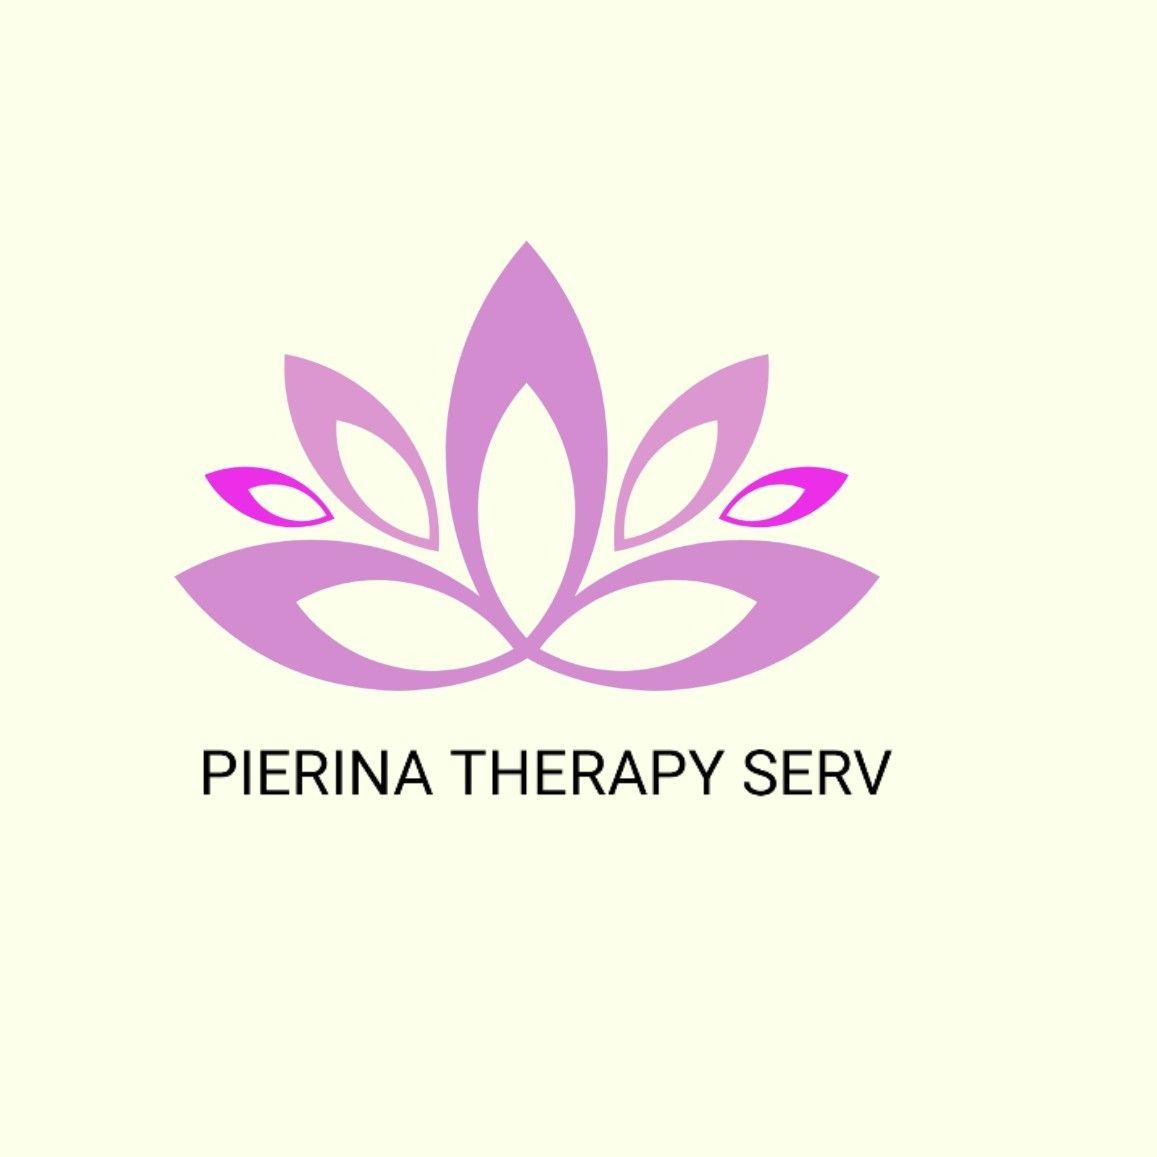 Pierina Therapy Services Inc, 2420 NW 87th Ave, Doral, Doral, 33172